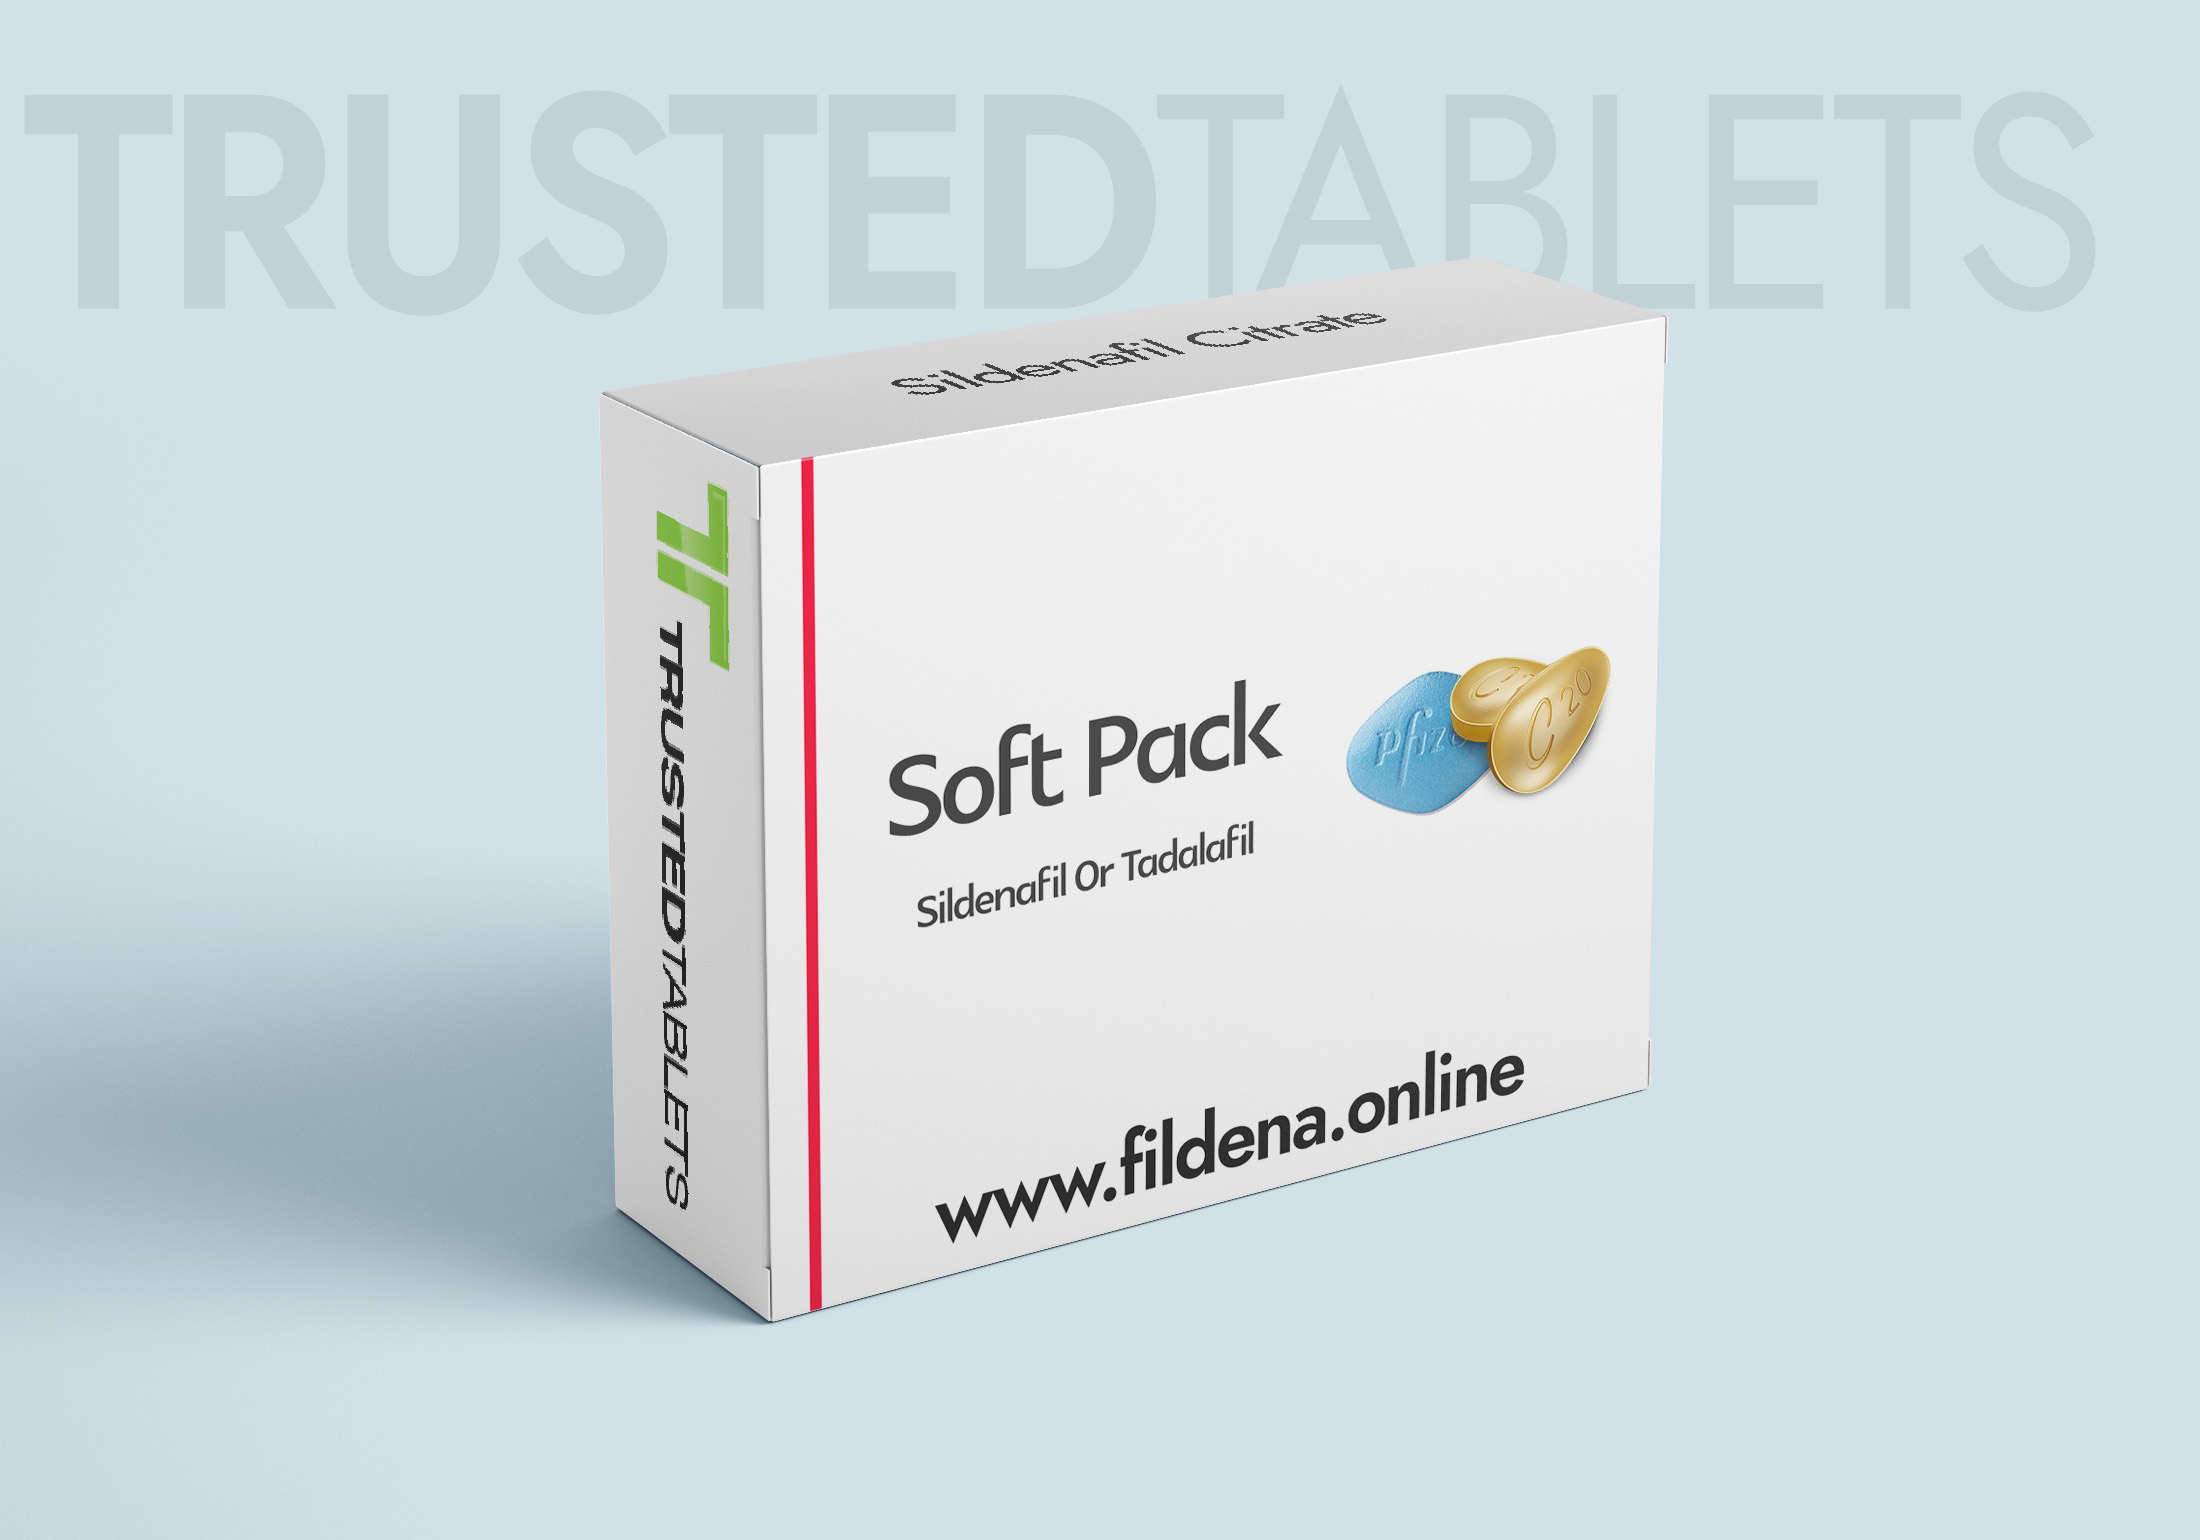 Strong Pack TrustedTablets